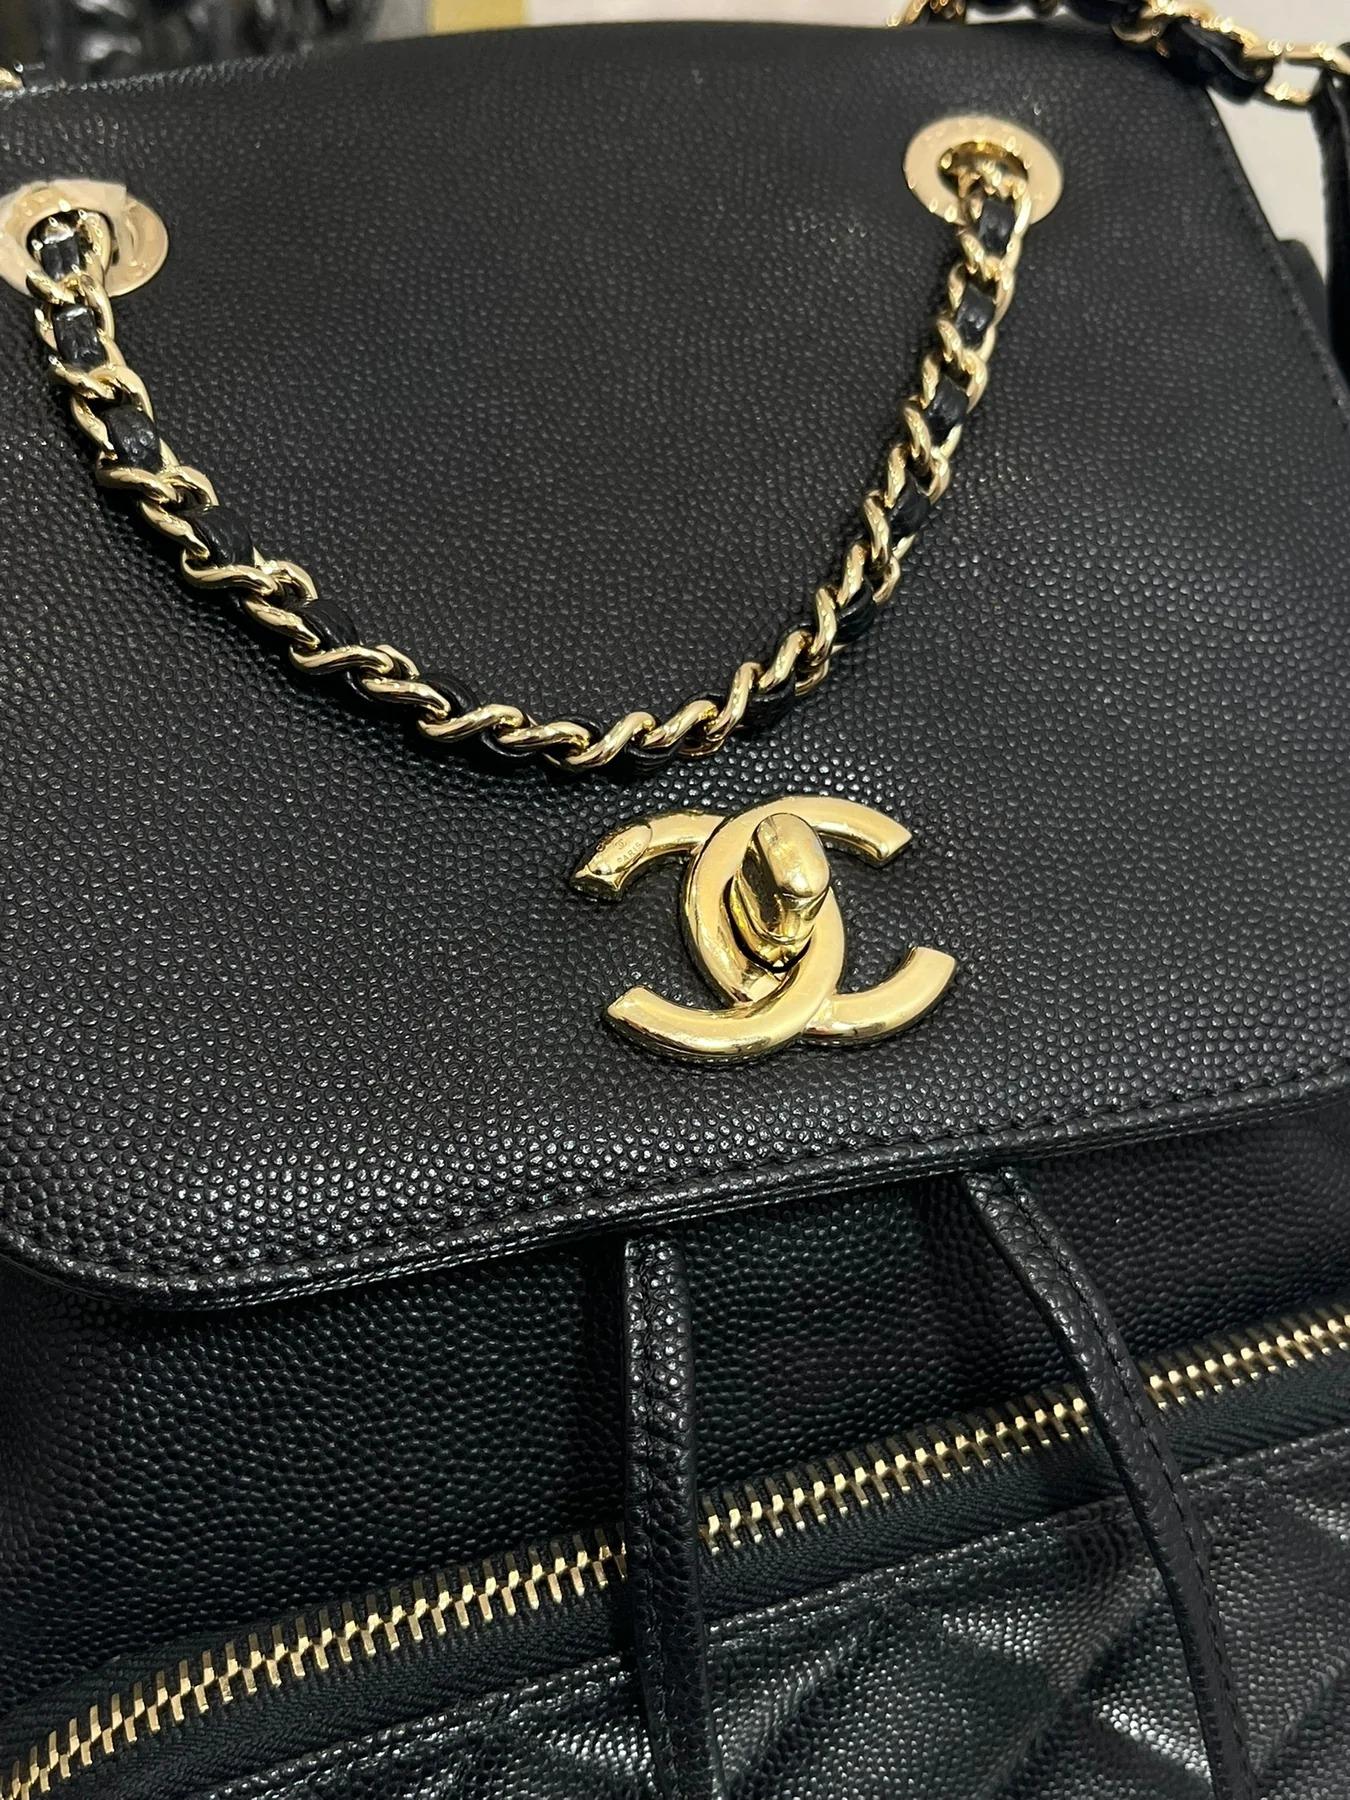 Chanel Affinity Caviar Leather Backpack 1